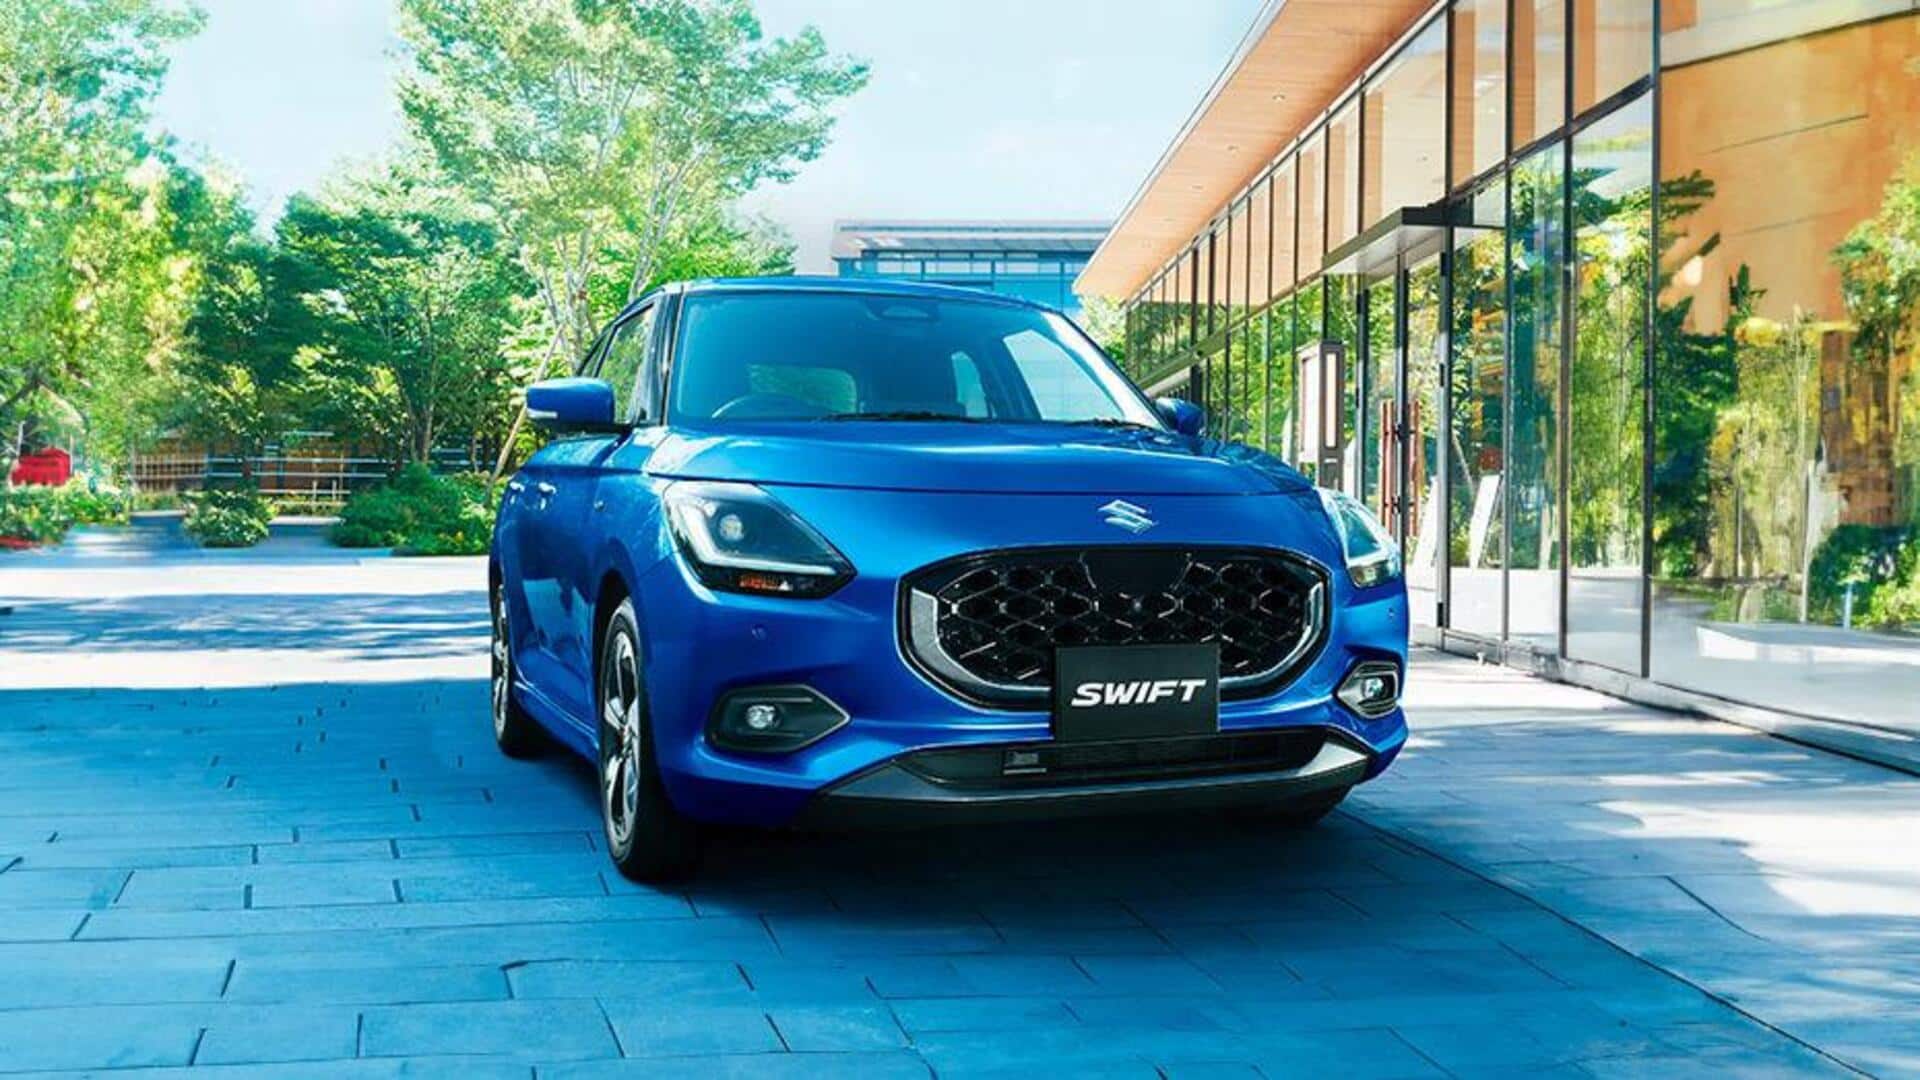 Maruti Swift launches on May 9: All things to know